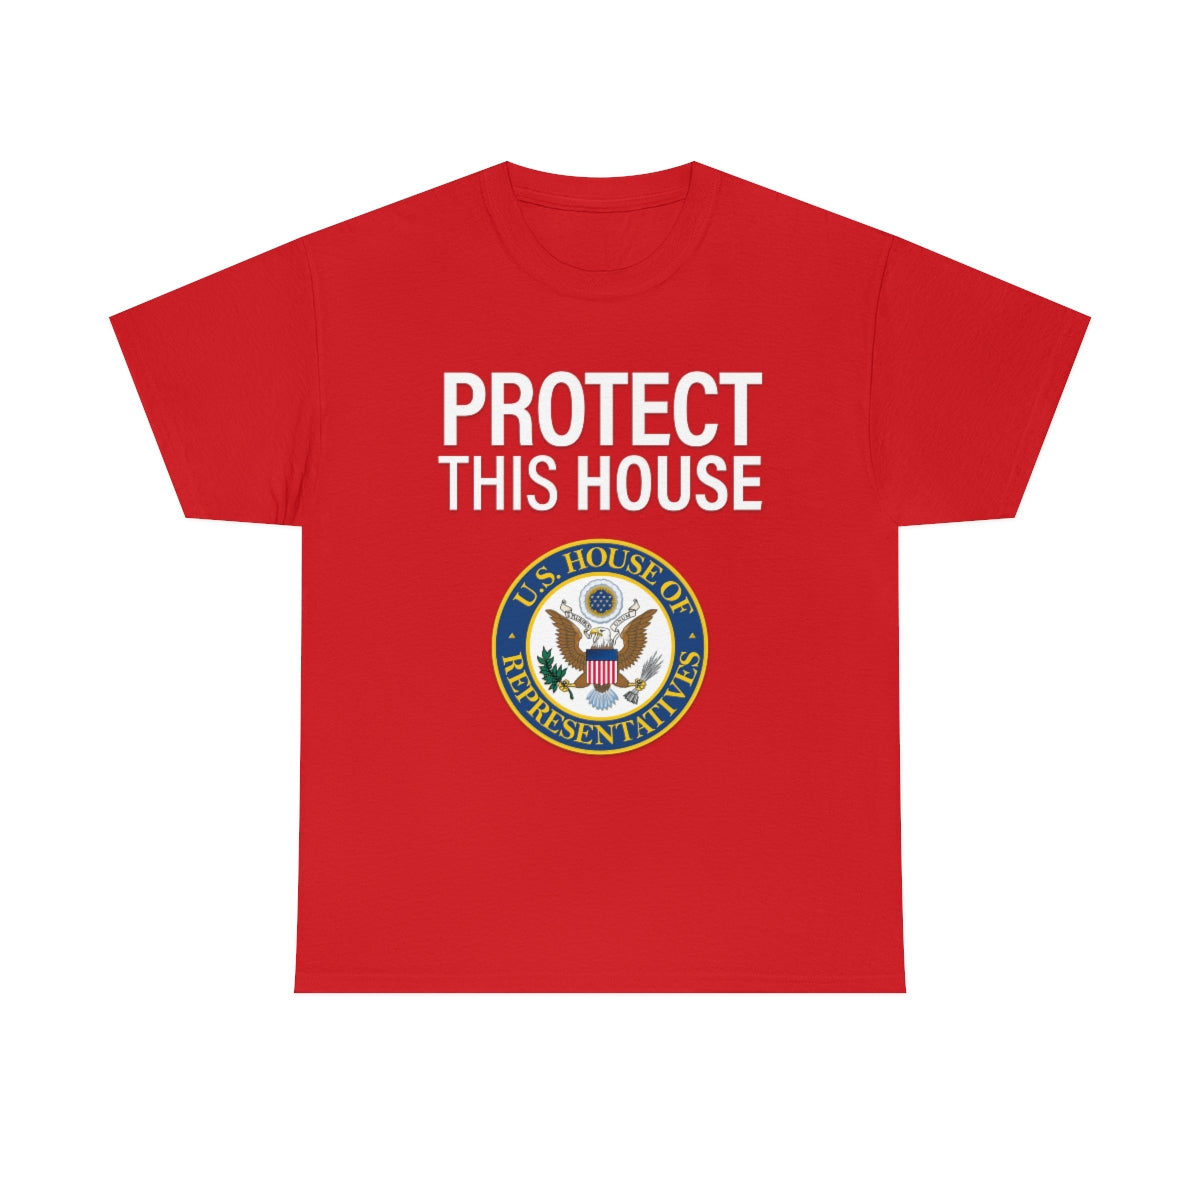 Protect This House - Shirt